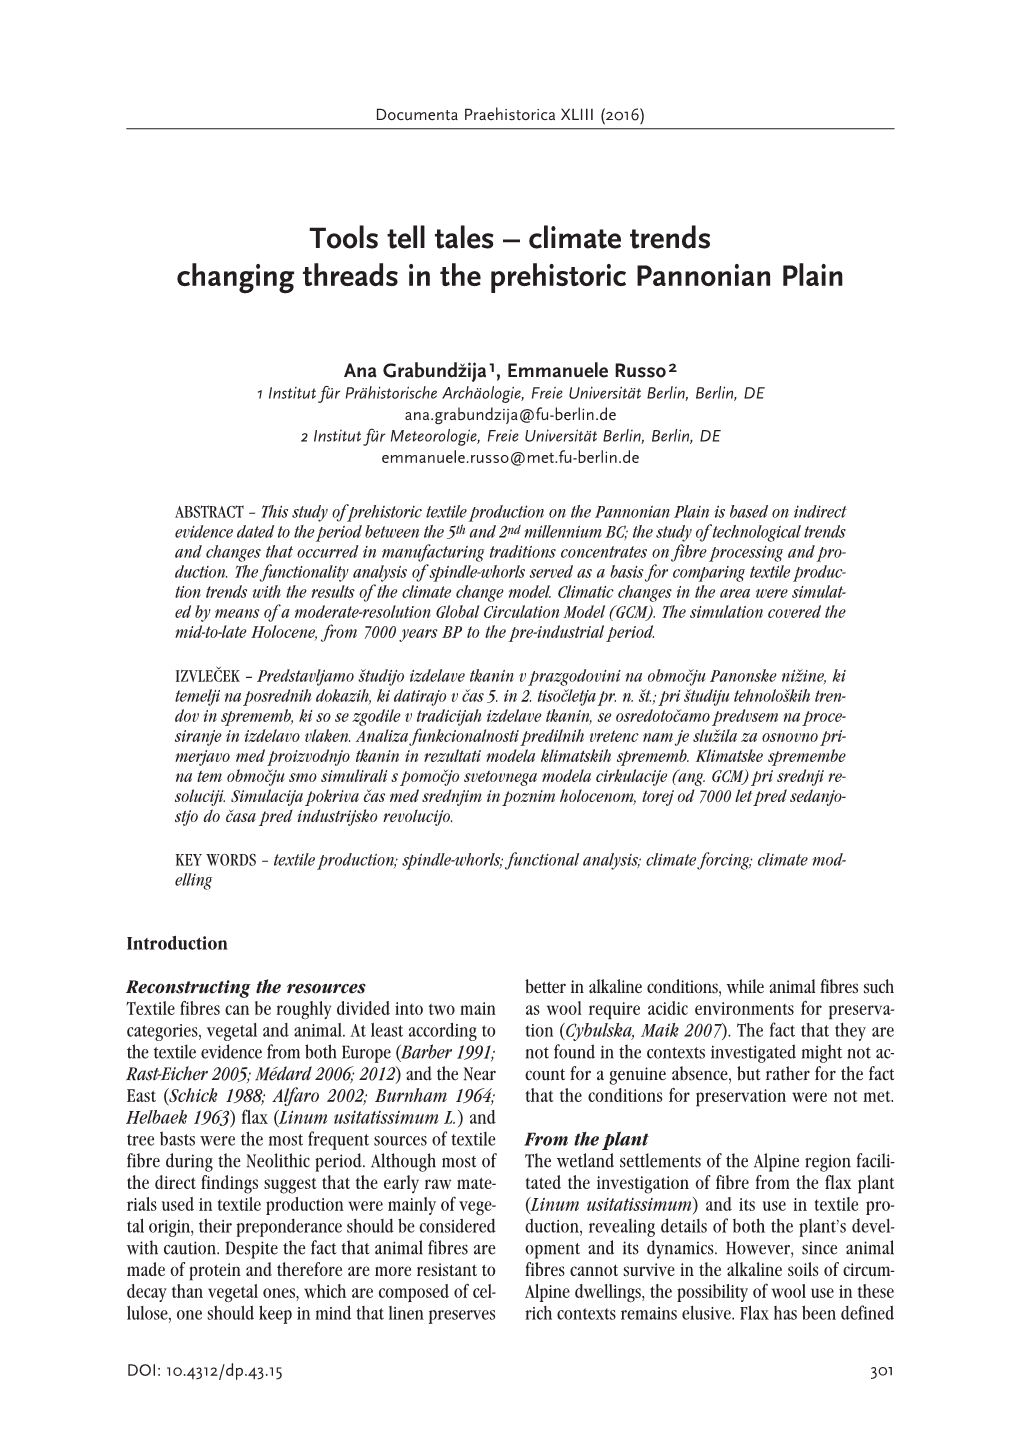 Climate Trends Changing Threads in the Prehistoric Pannonian Plain